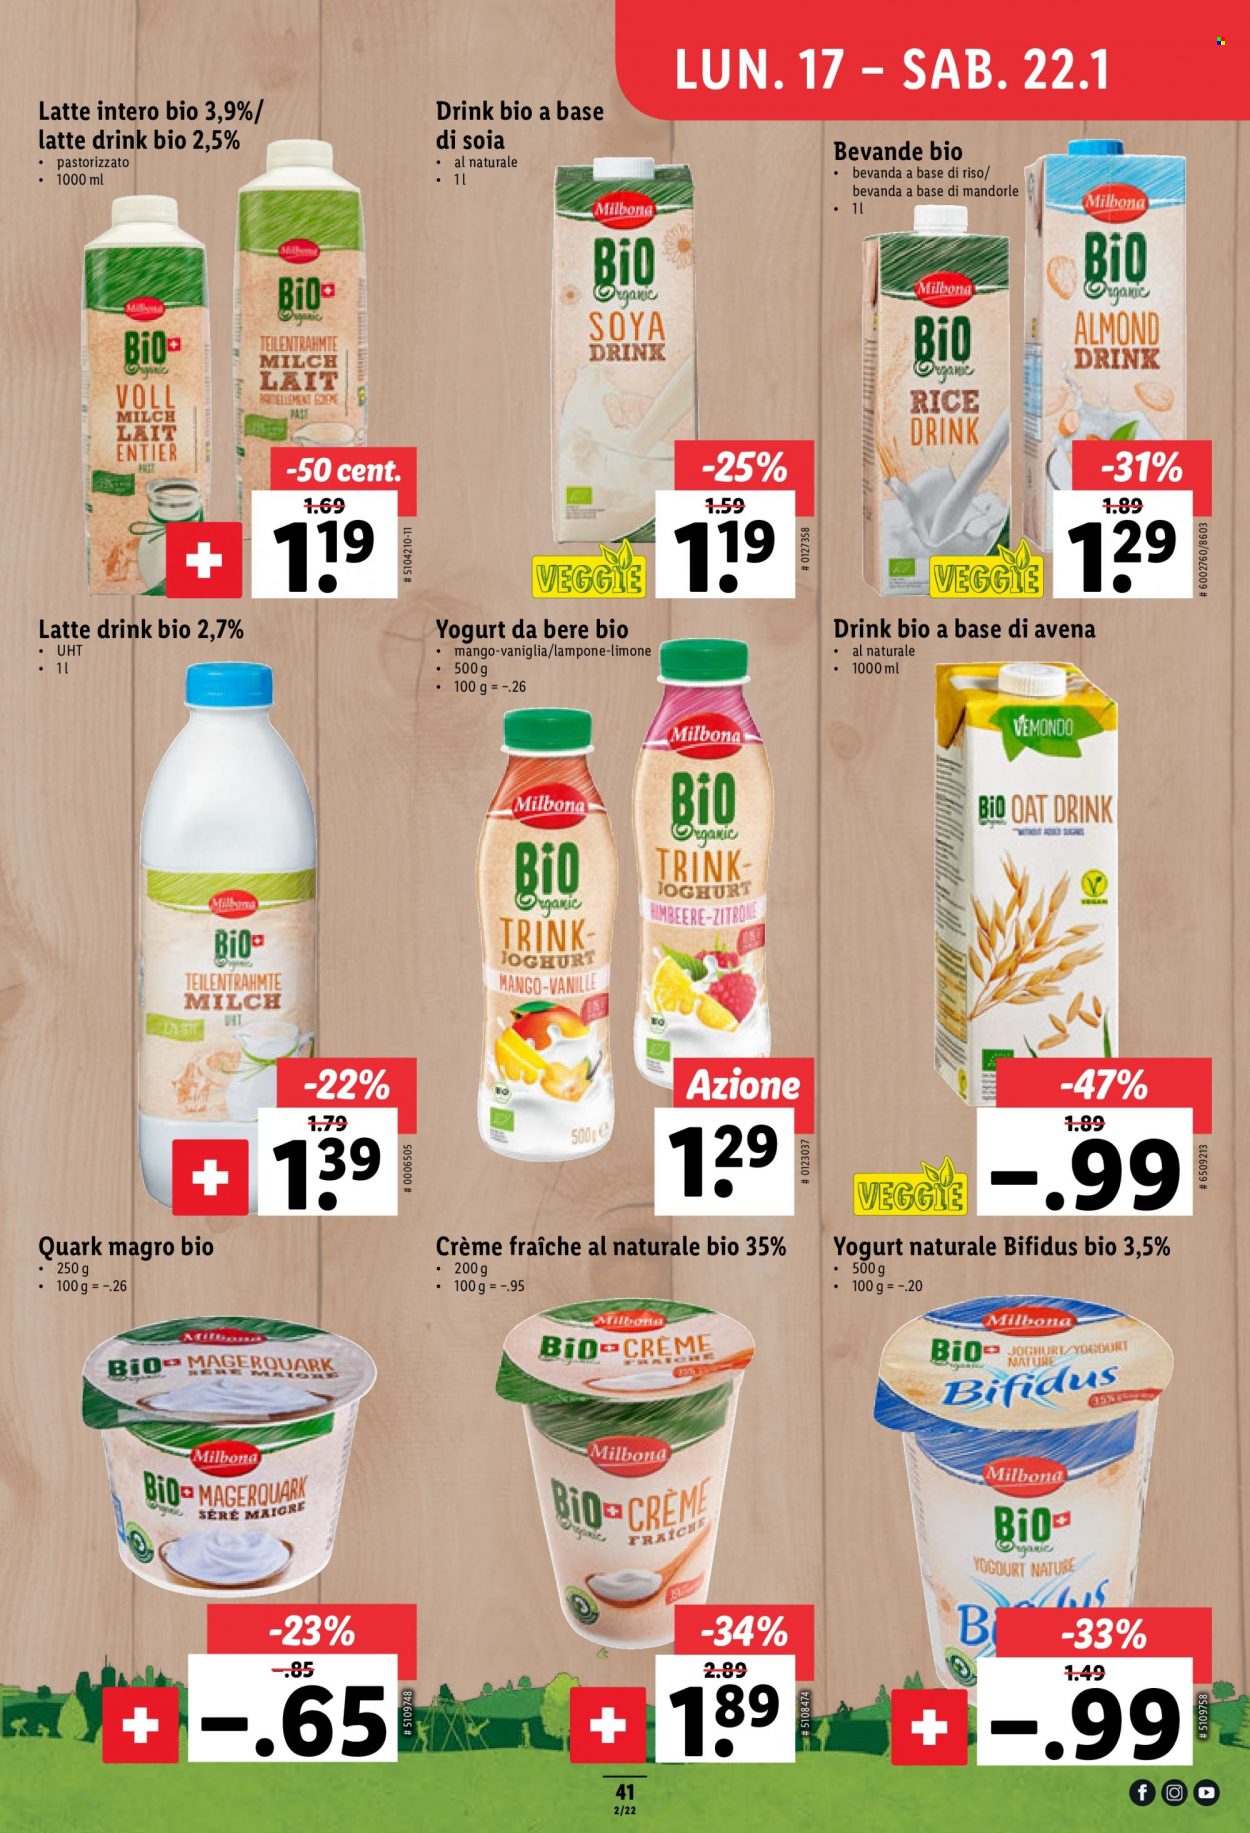 Catalogue Lidl - 13.1.2022 - 19.1.2022. Page 41.